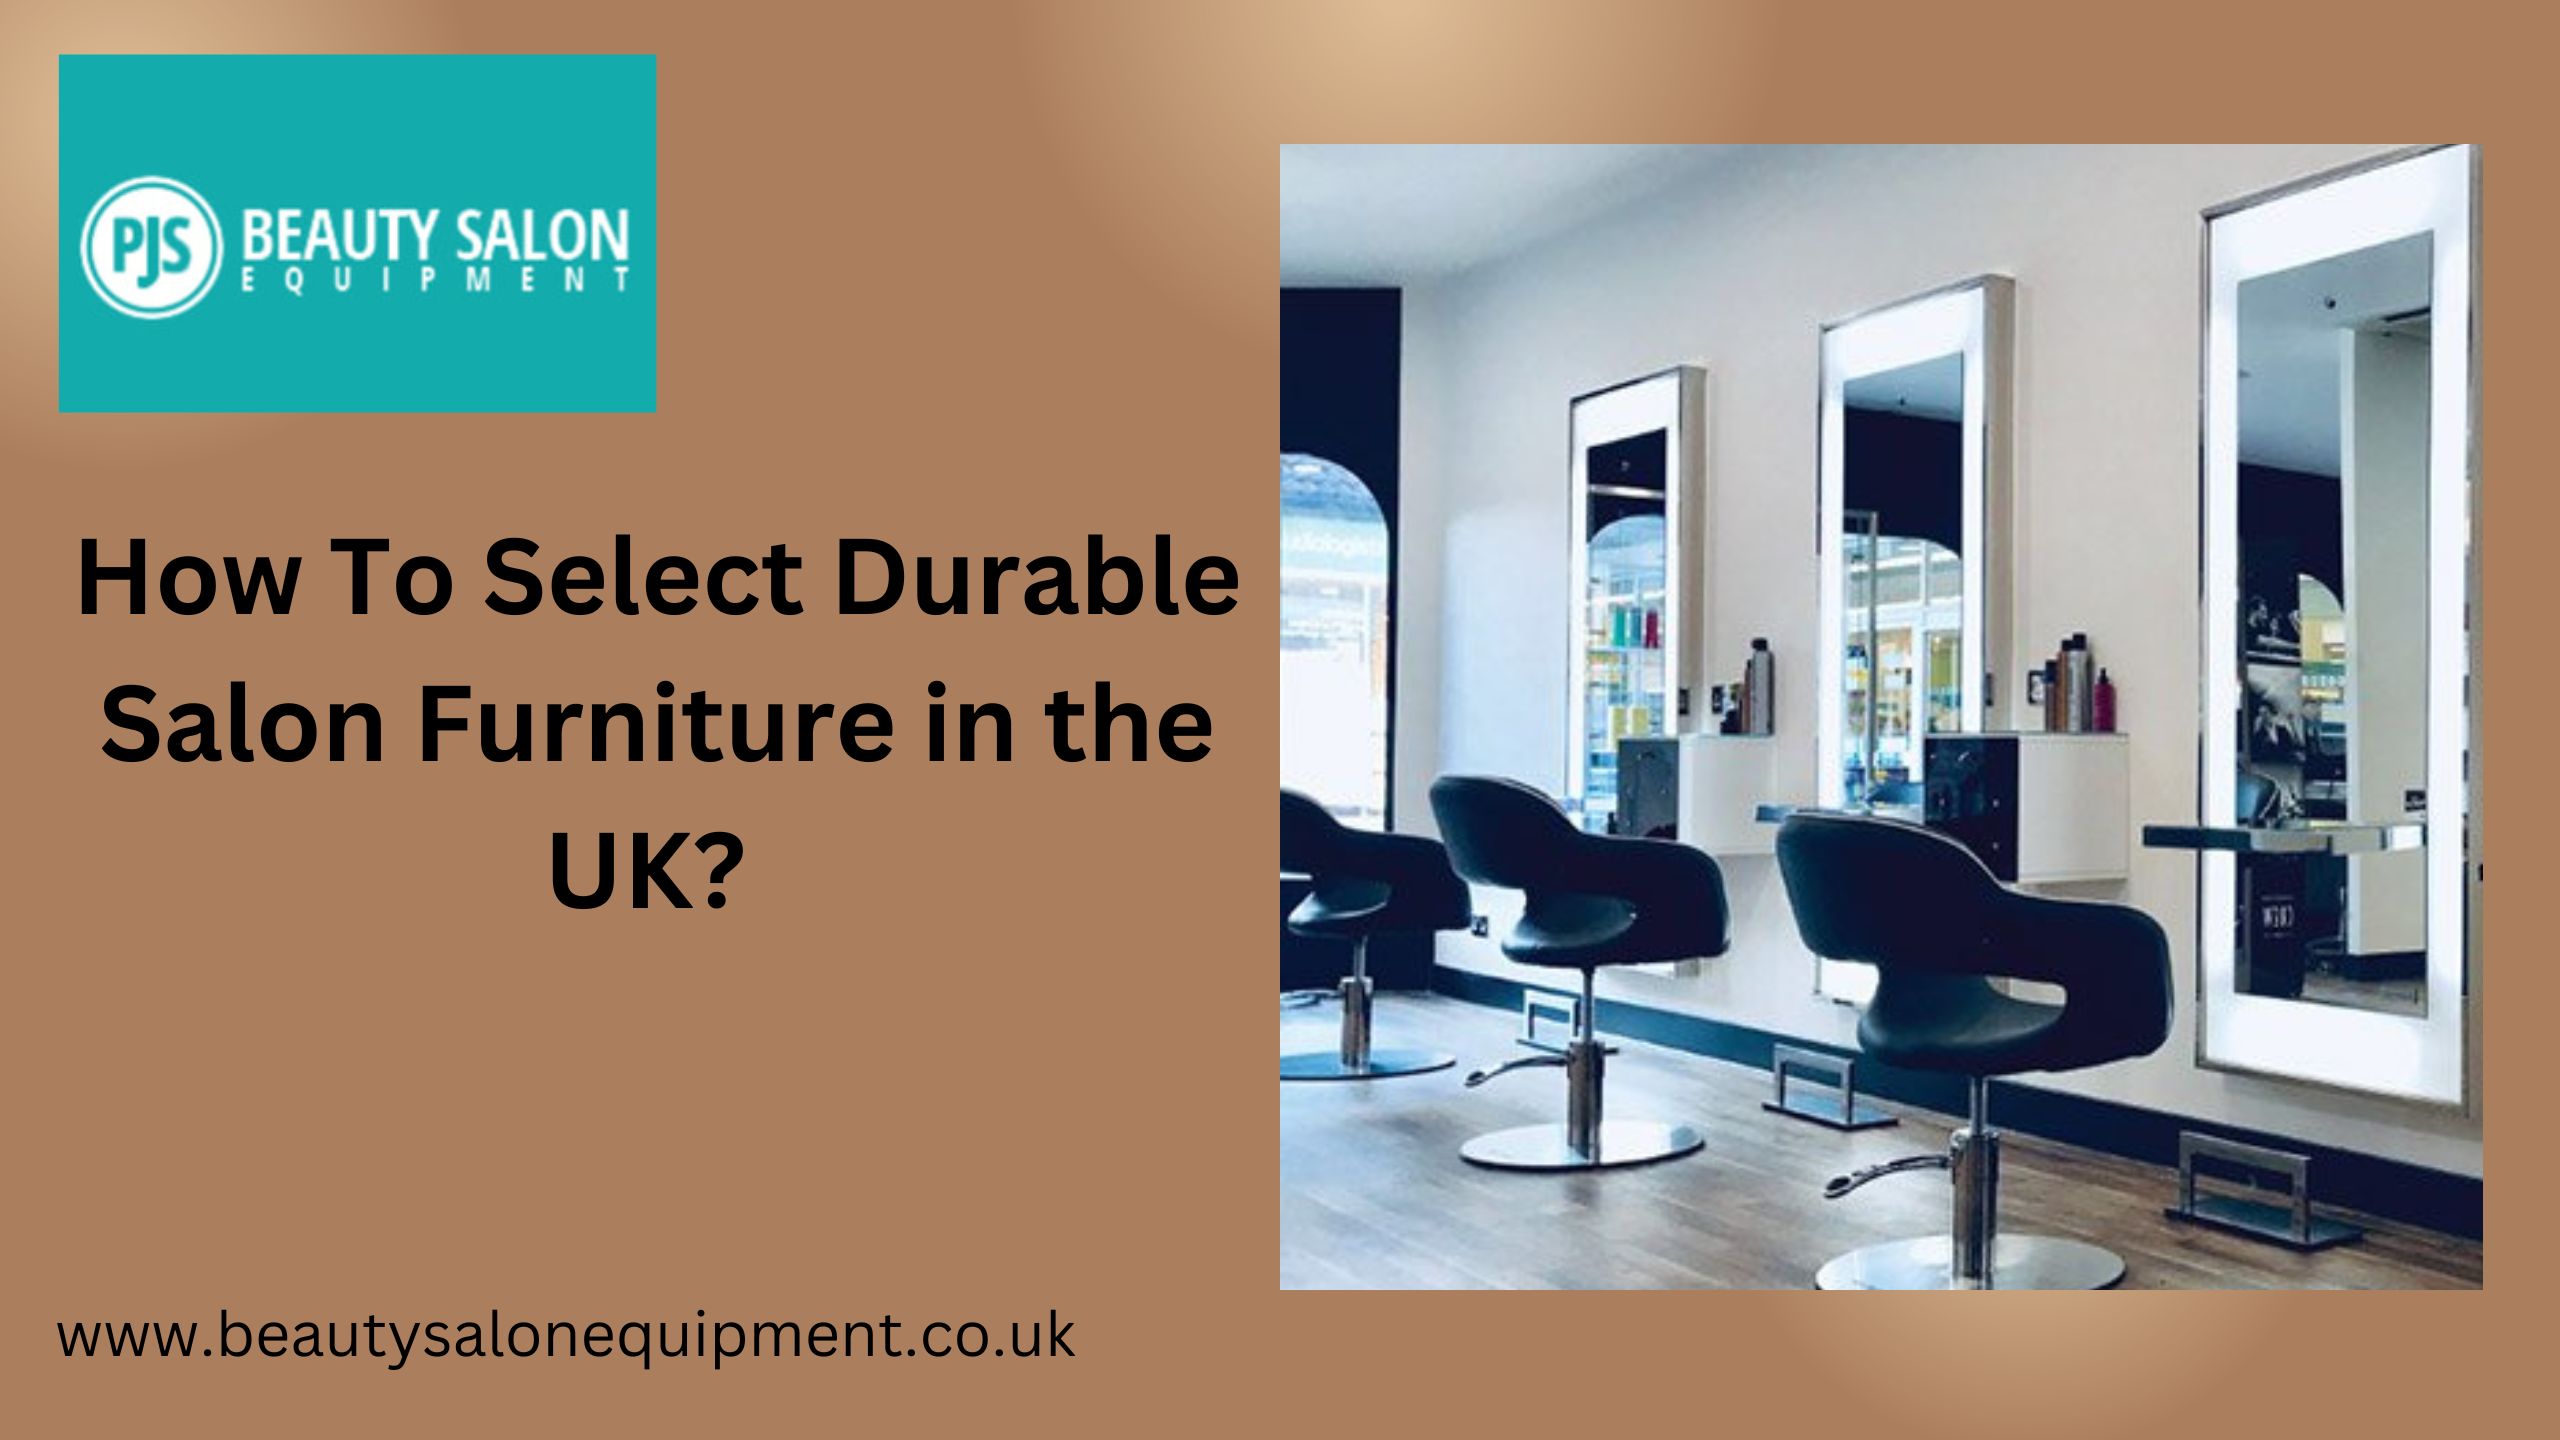 How To Select Durable Salon Furniture in the UK